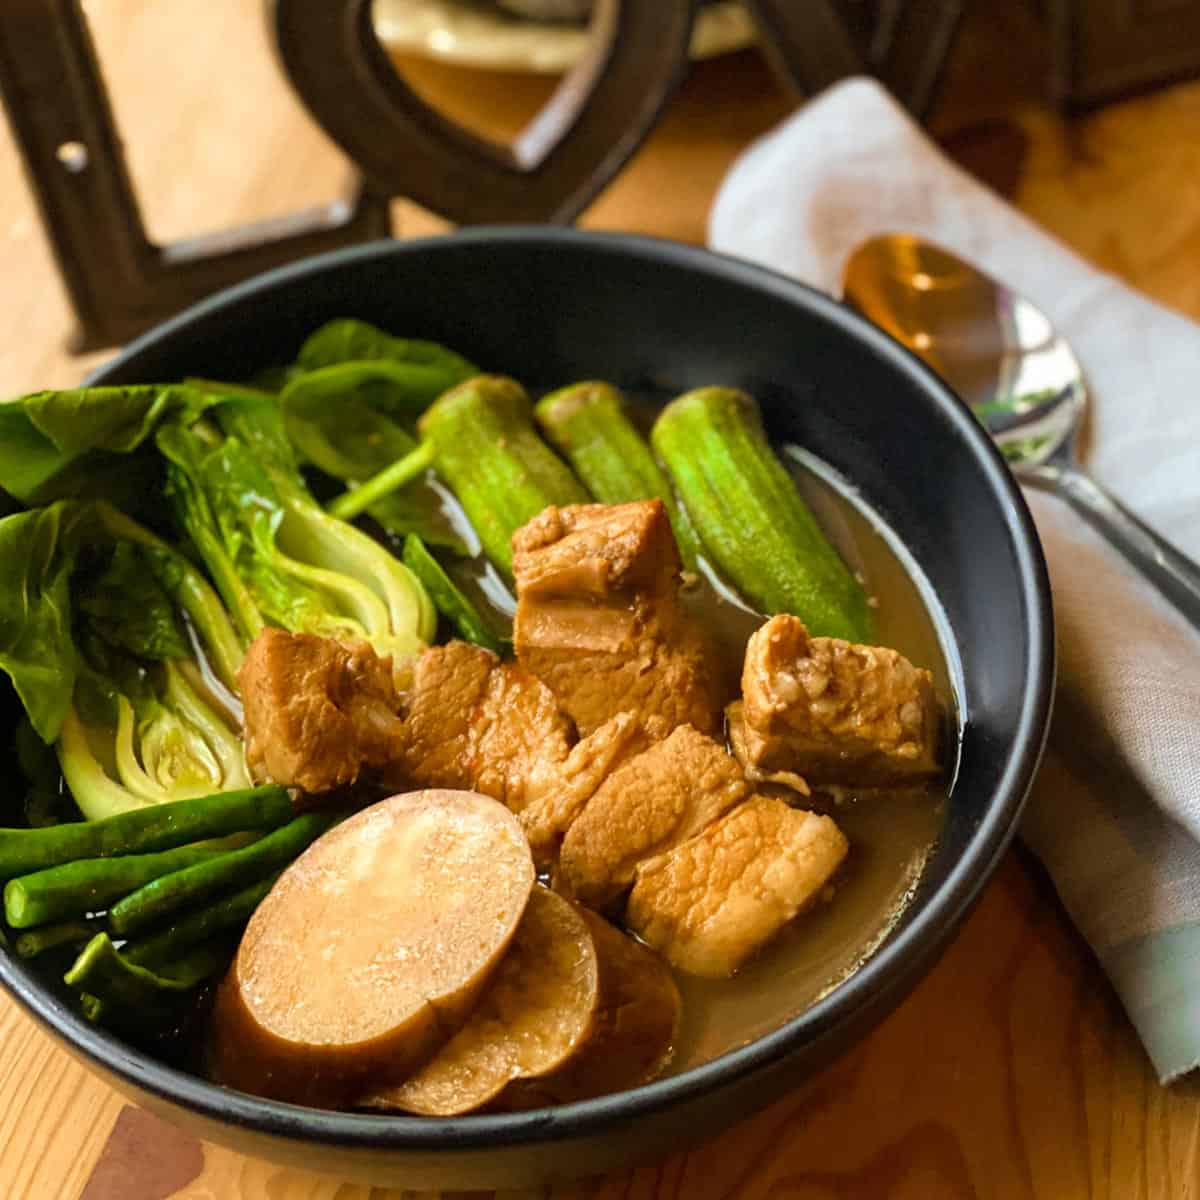 Pork sinigang sour soup with sliced eggplant, string beans, baby bokchoy, okra with tamarind sauce in a black bowl with soup and napkin on the side